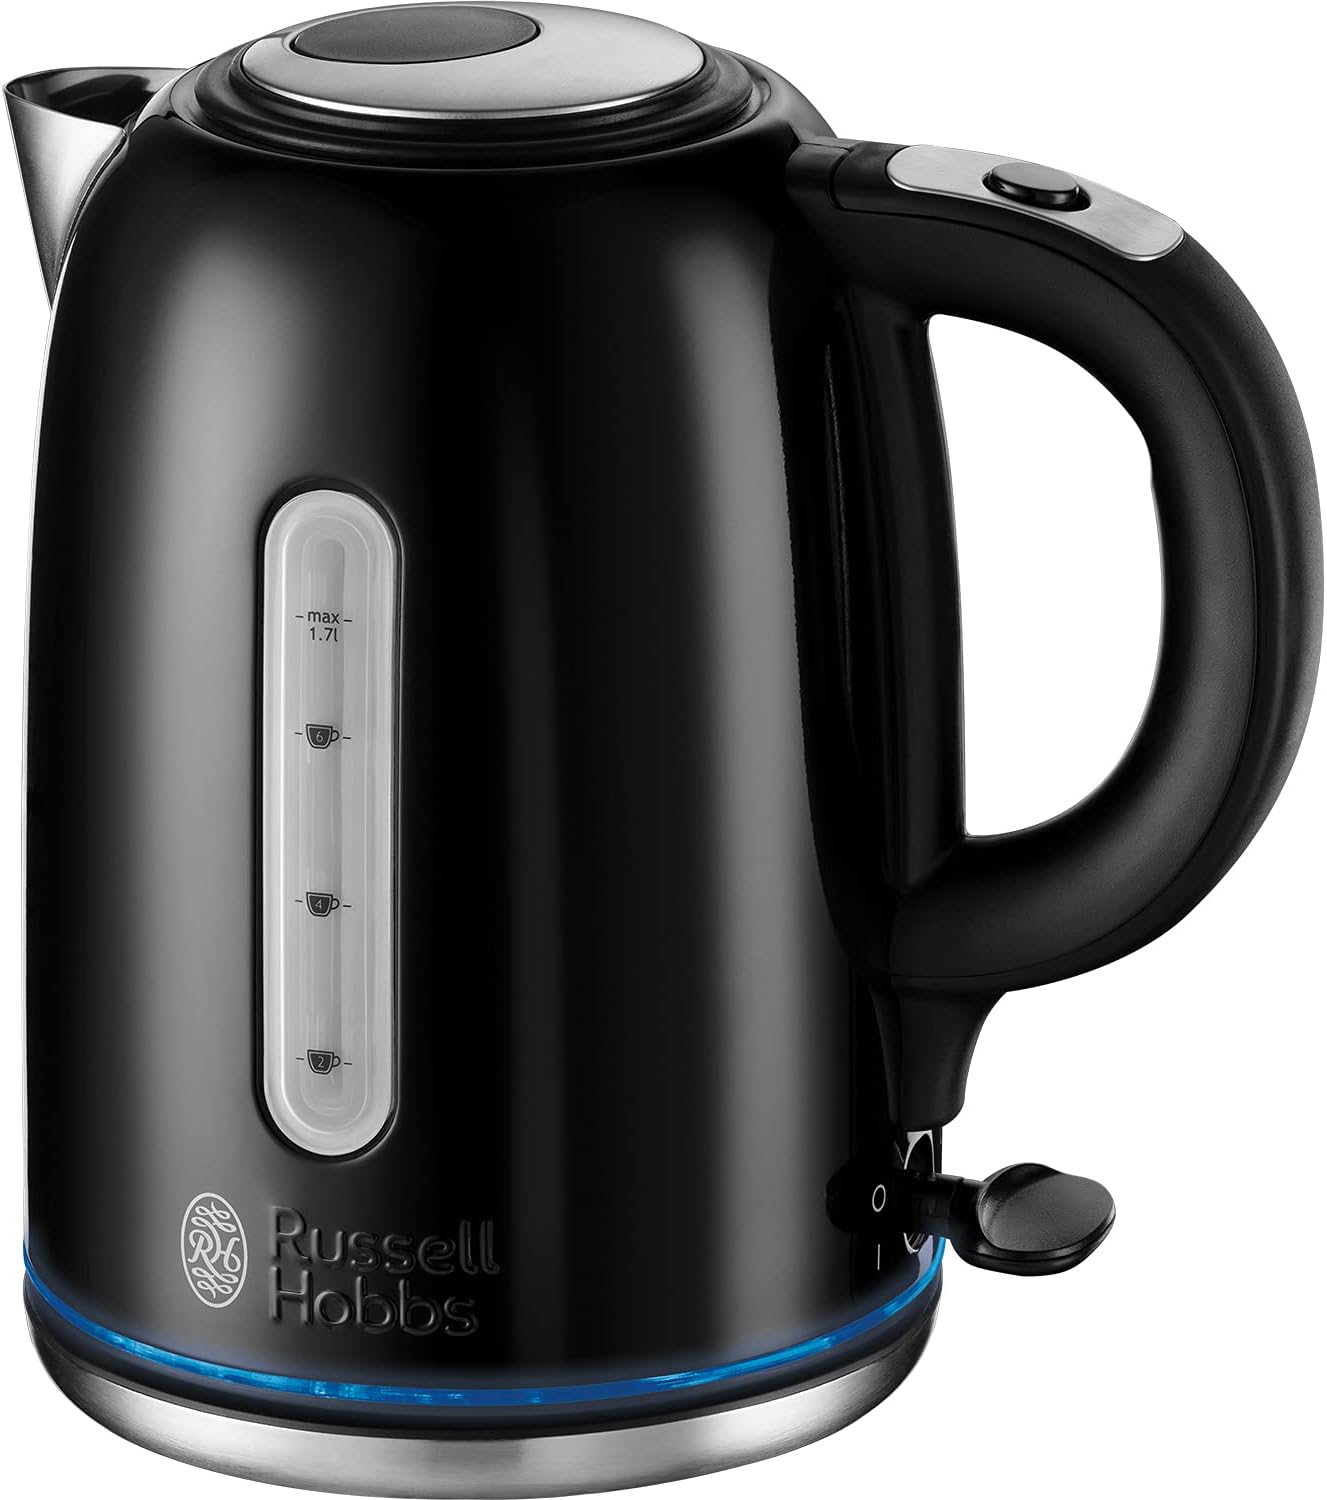 Russell Hobbs Black Stainless Steel Electric 1.7L Cordless Kettle (Quiet & Fast Boil 3KW, Removable washable anti - scale filter, Push button lid, Perfect pour spout) 20462 - Amazing Gadgets Outlet